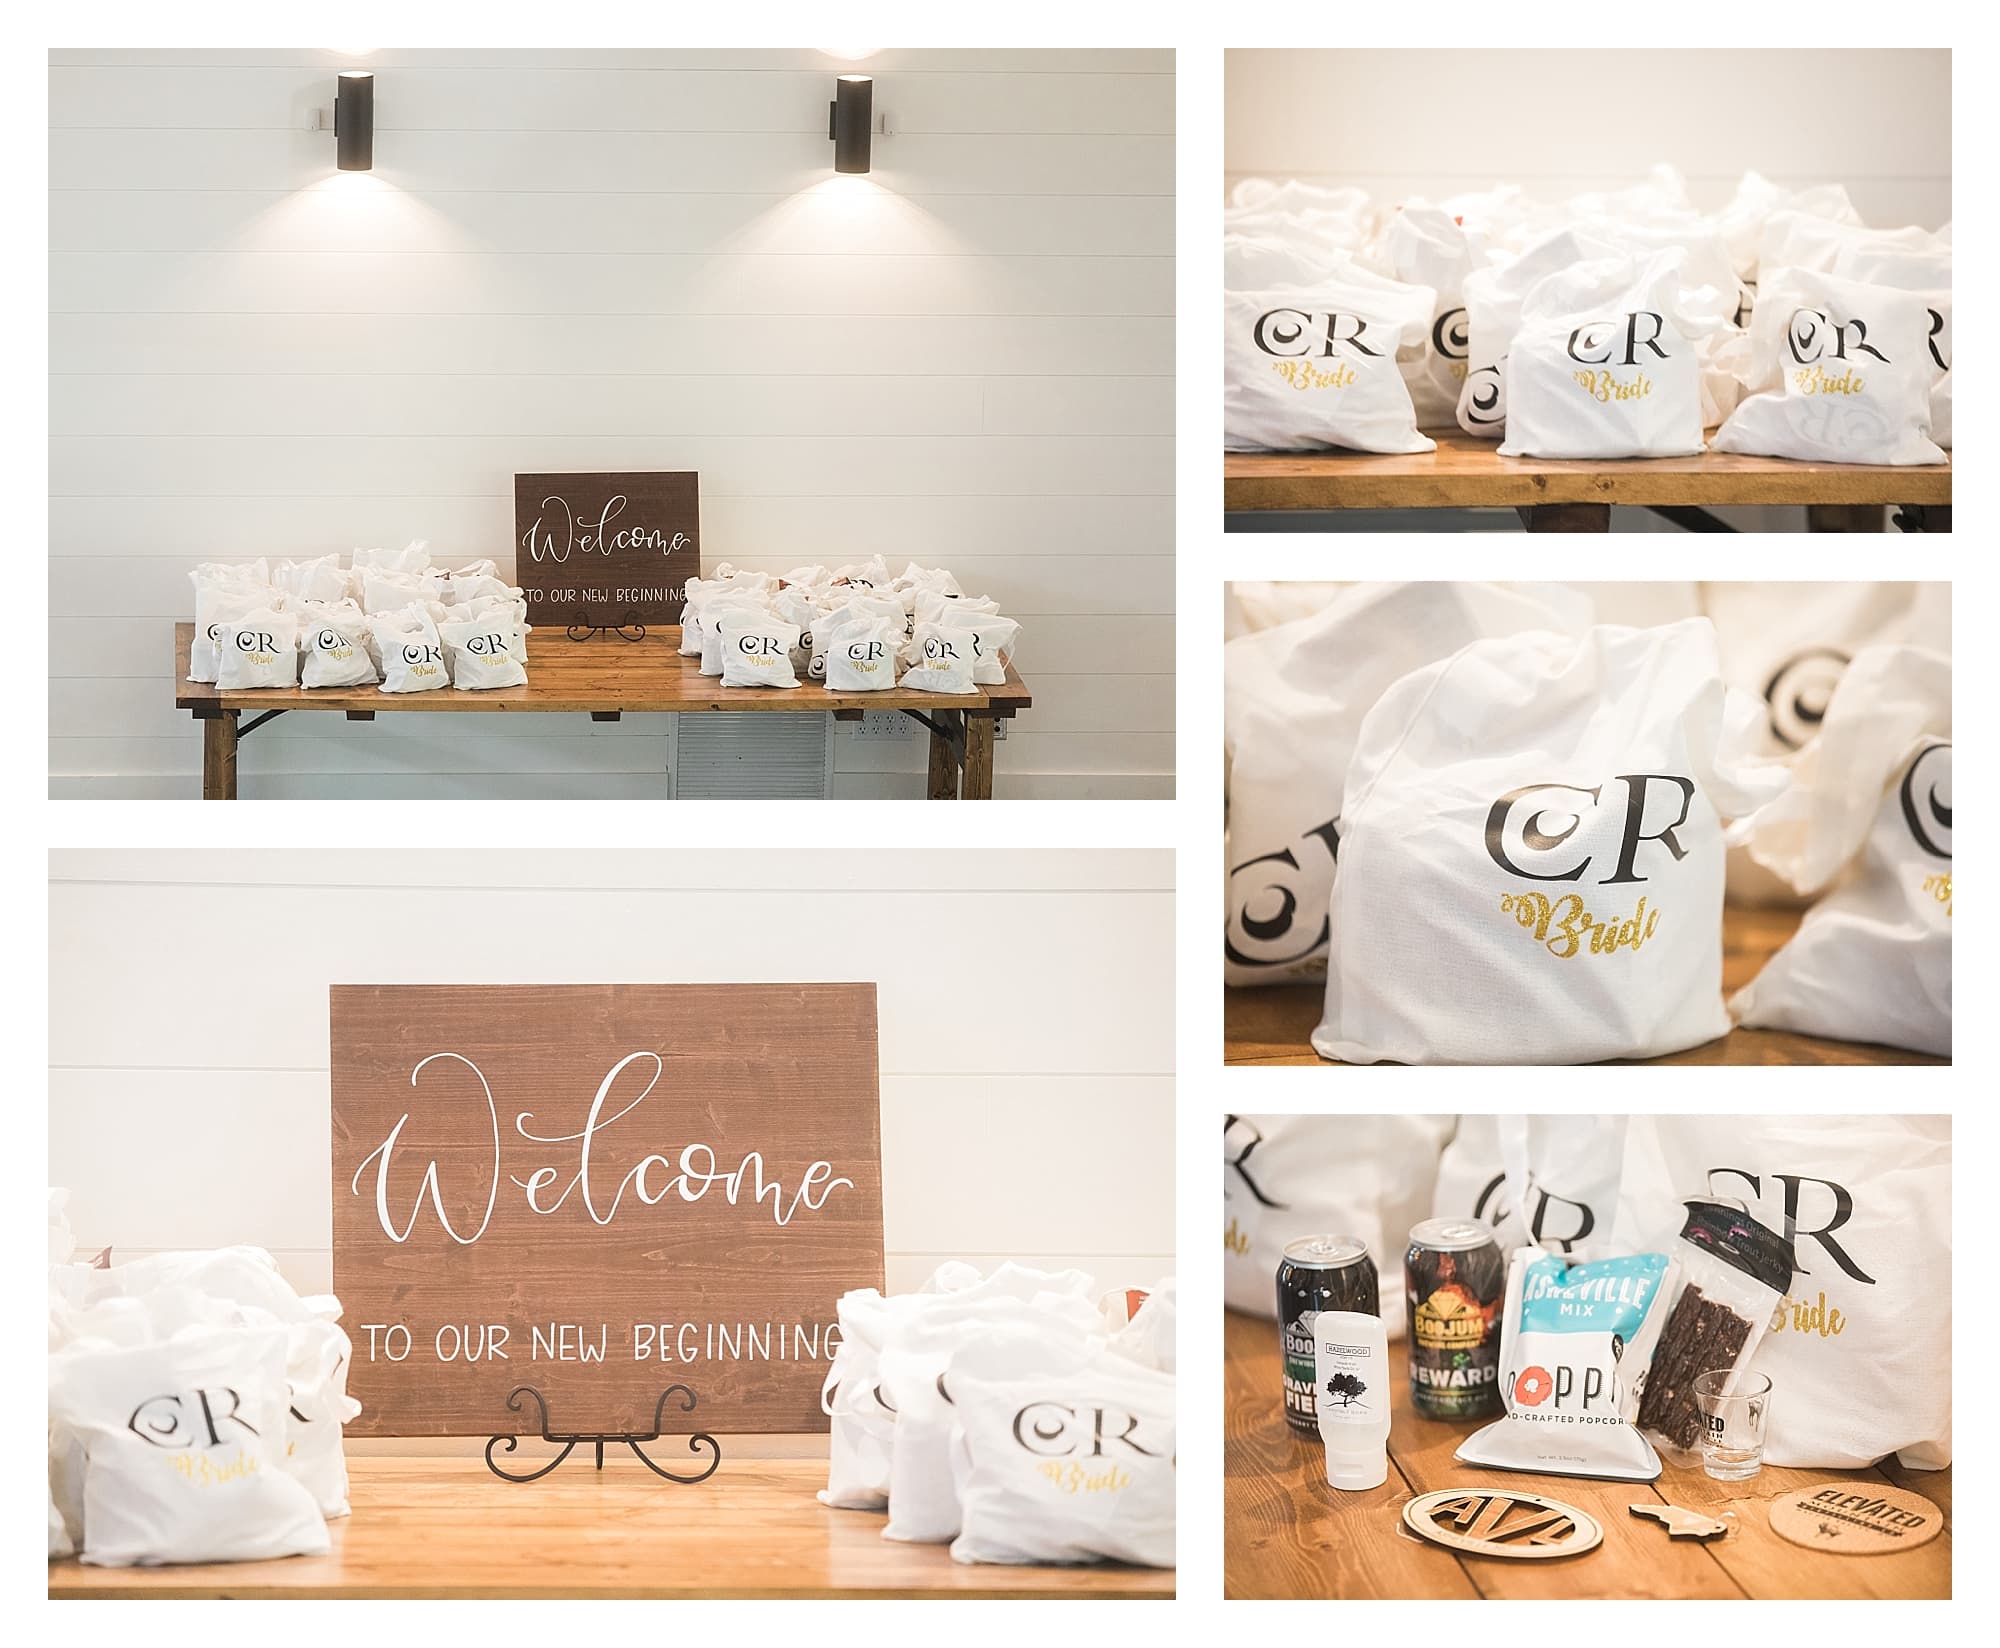 Goodie bags for bride from Chestnut Ridge Venue